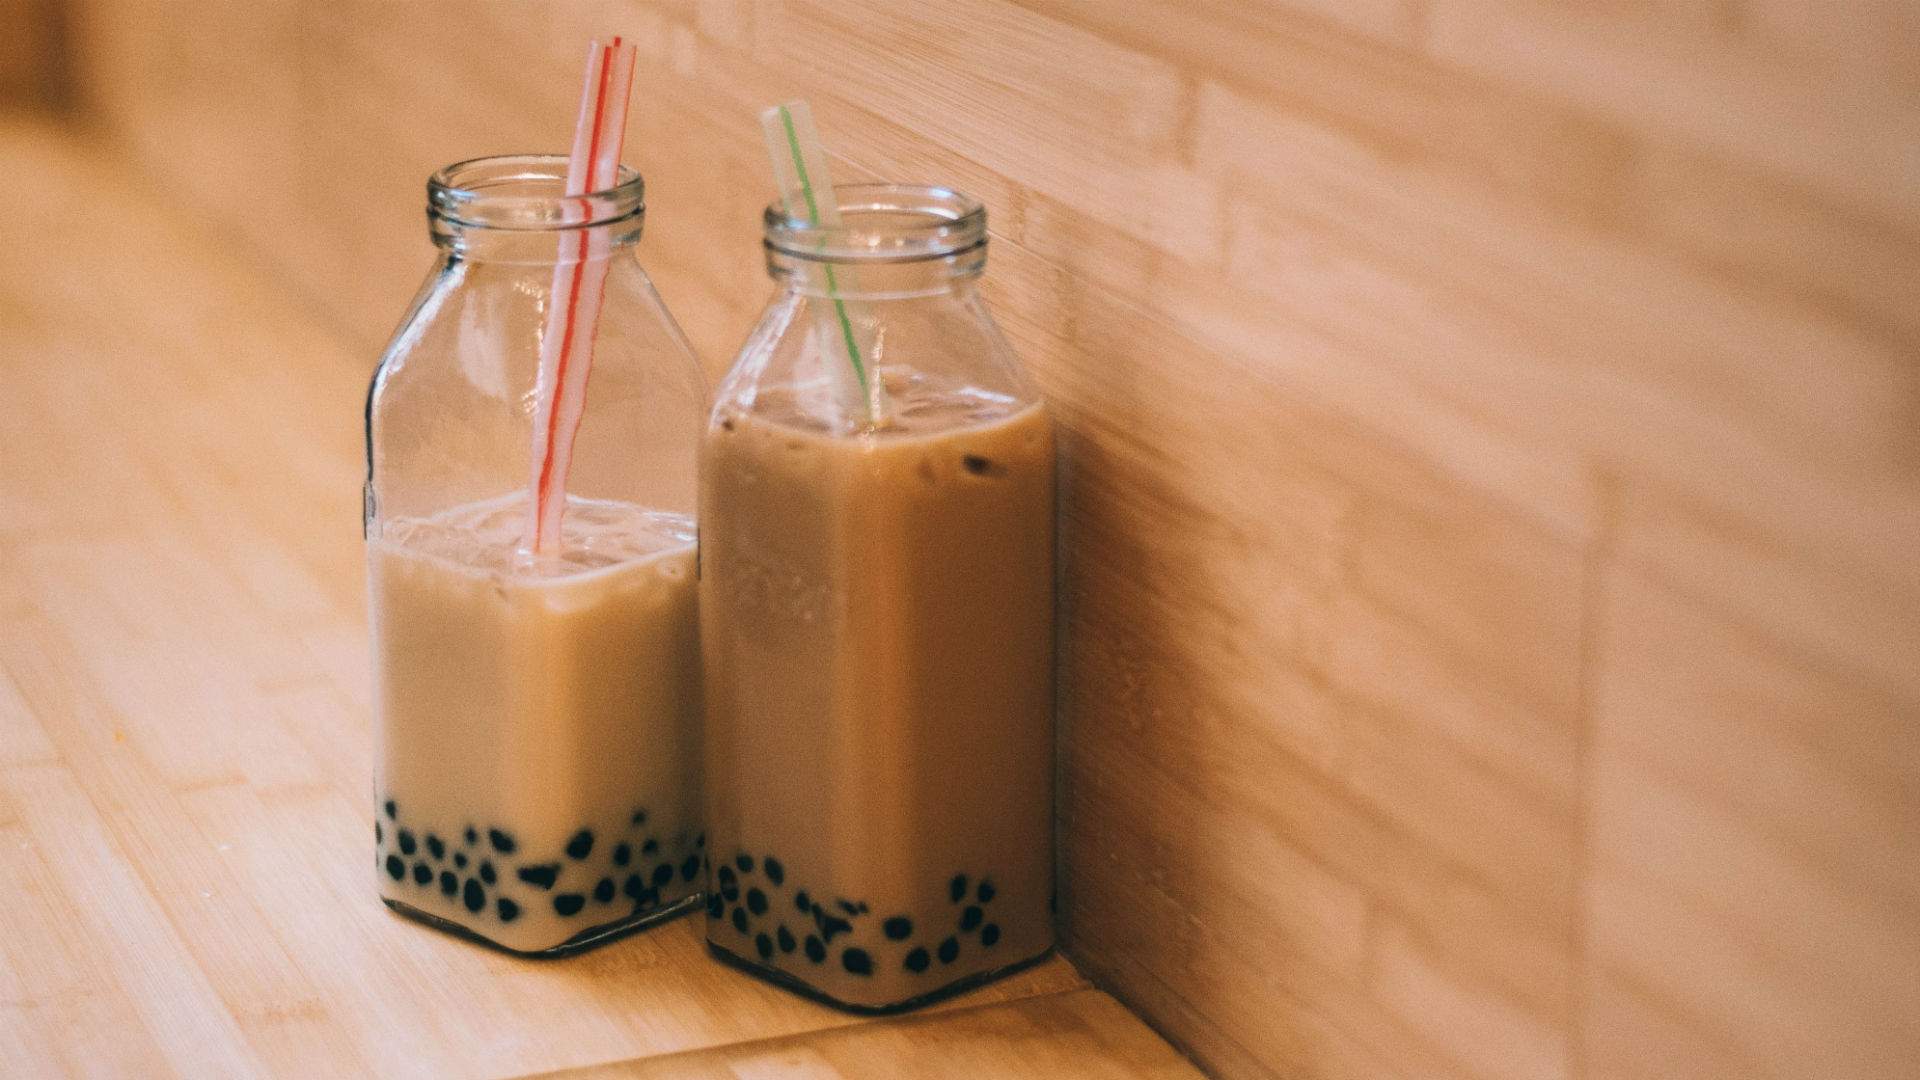 Japan's New Over-the-Top Theme Park Is Entirely Dedicated to Bubble Tea